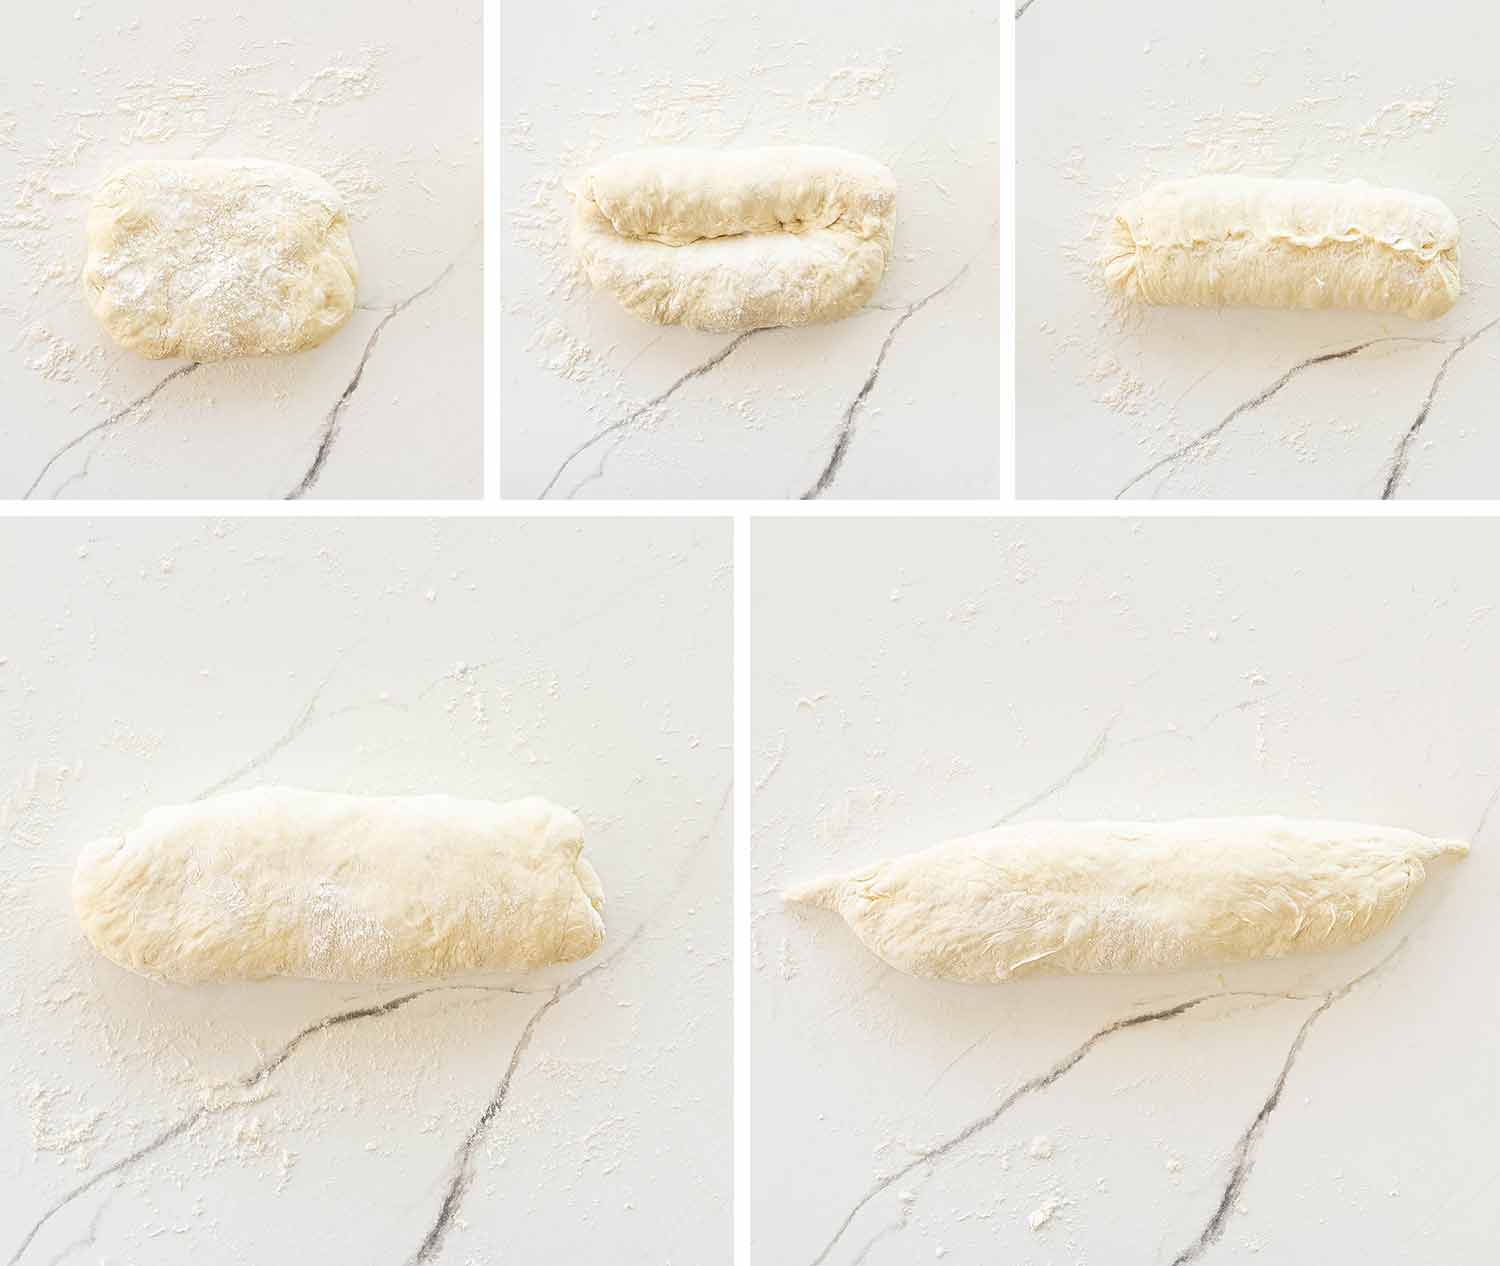 process shots showing how to make no knead baguette.